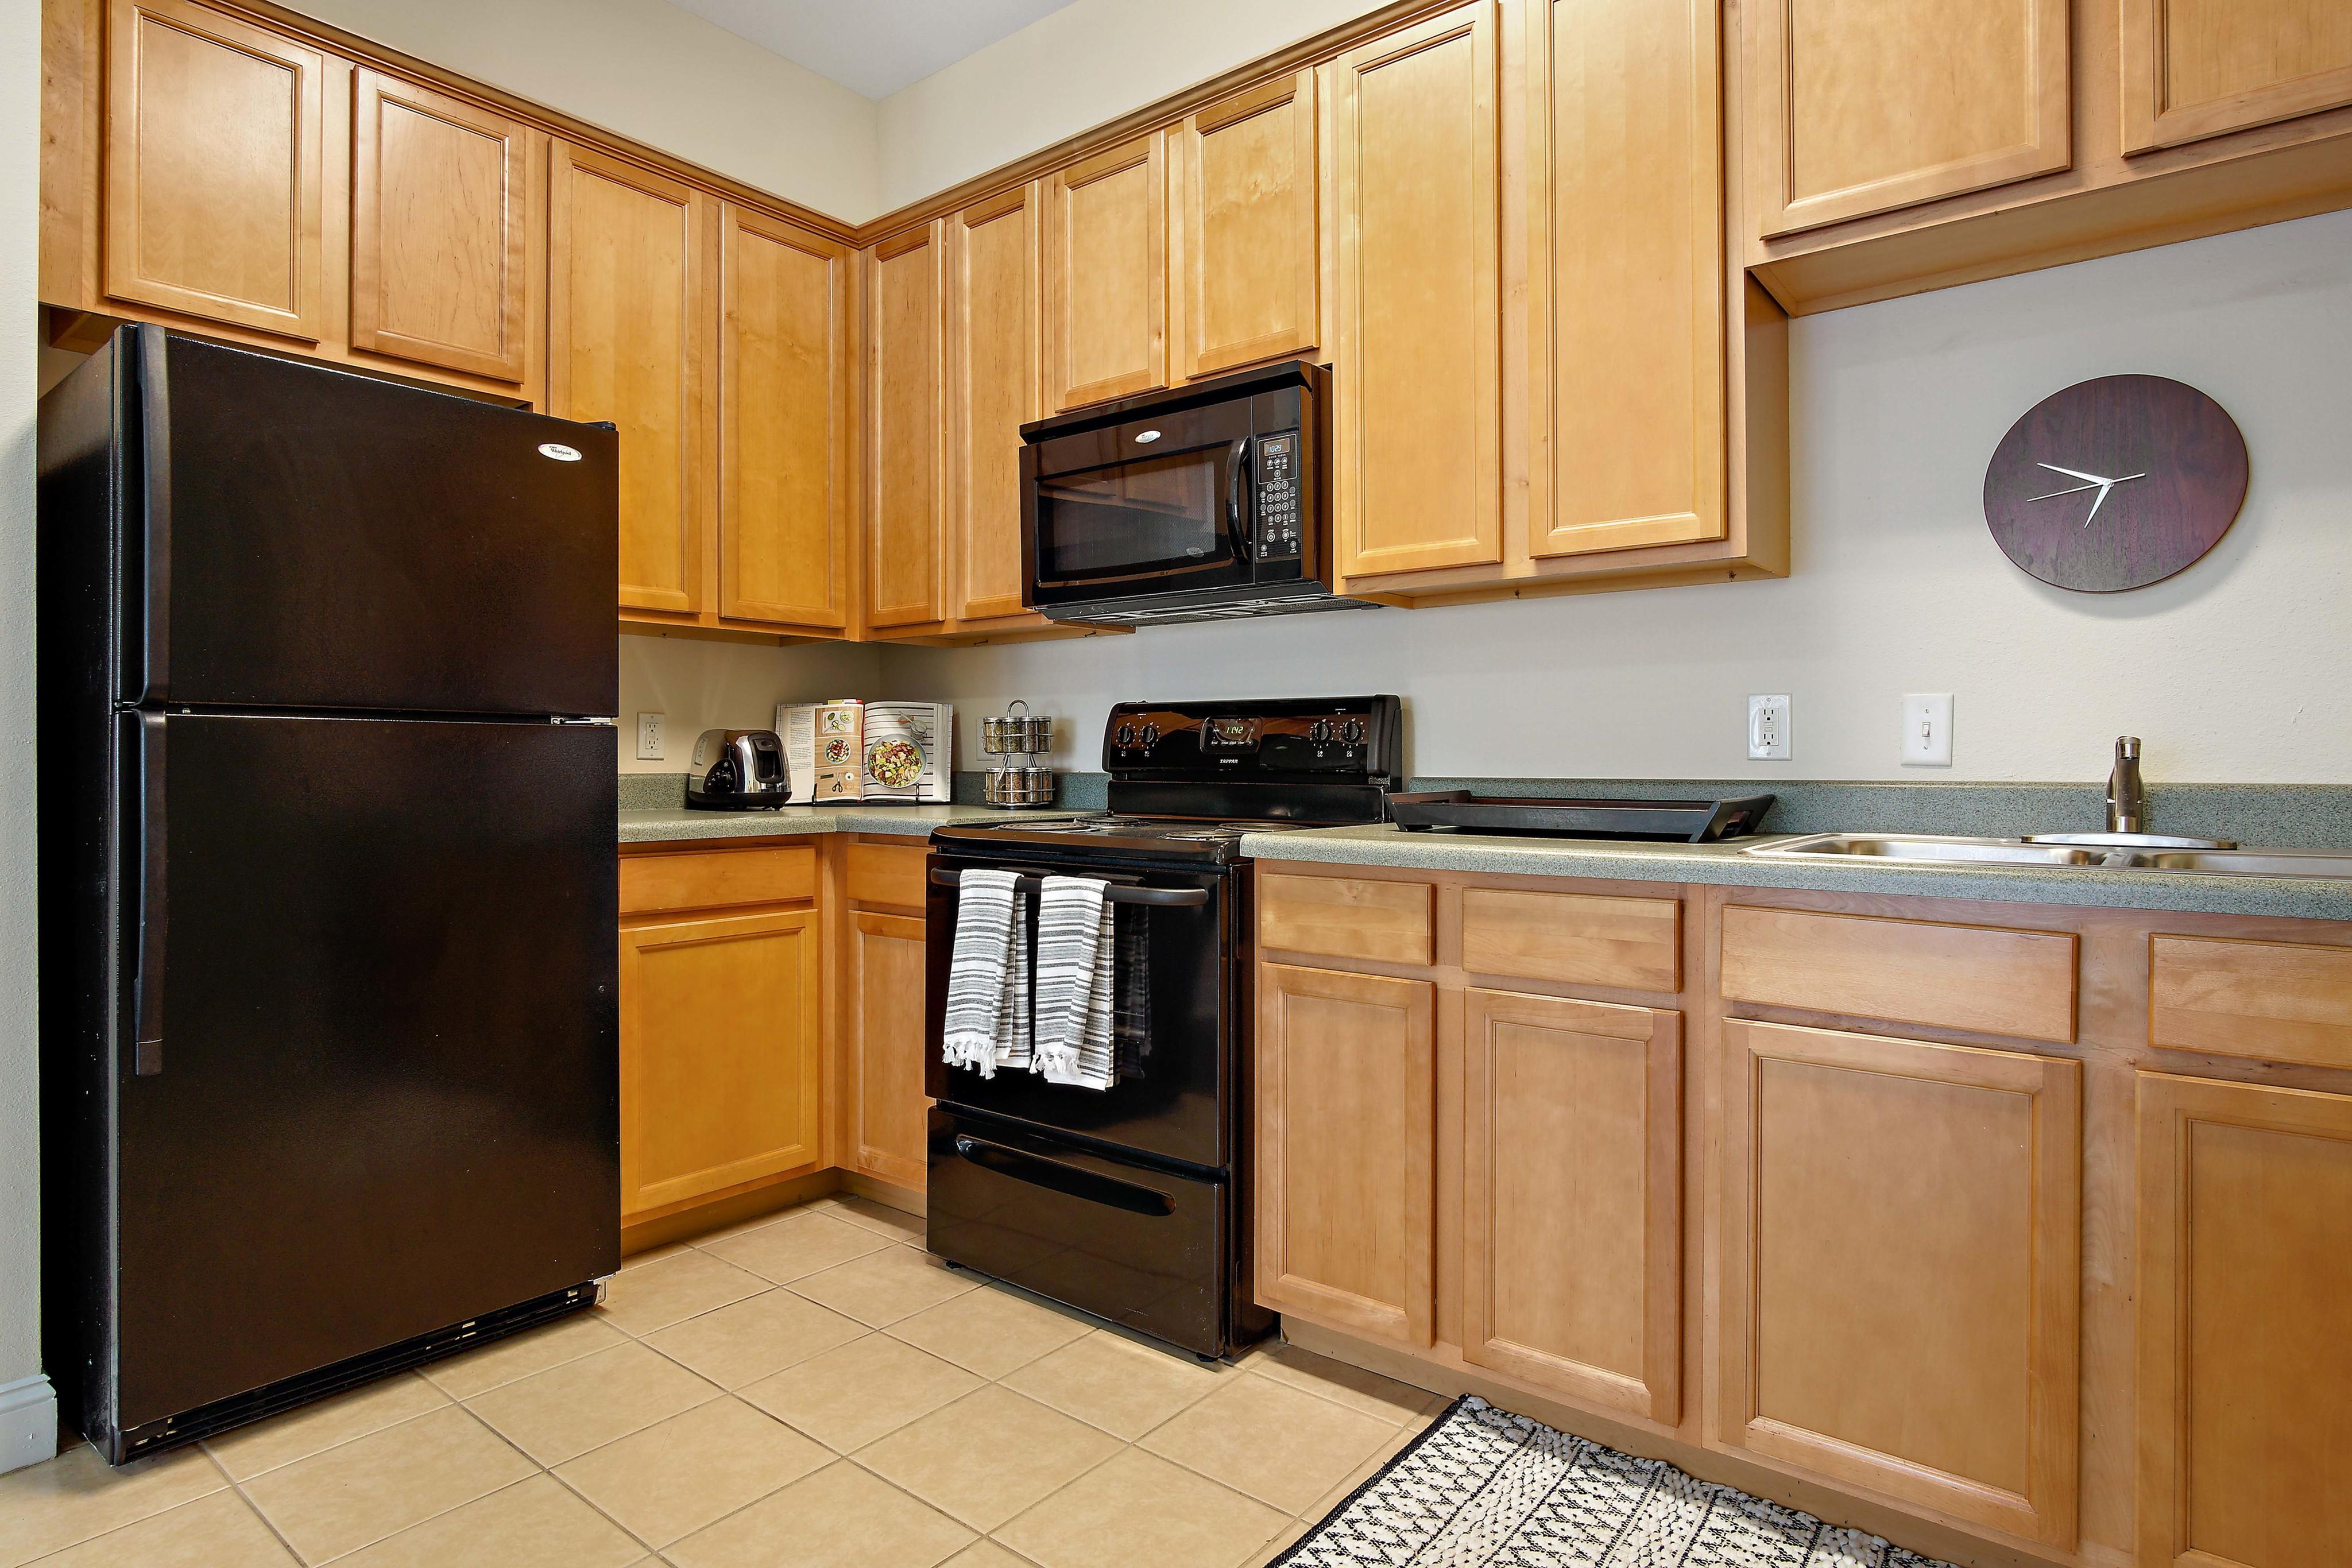 Large kitchen with a dishwasher. Central House on Stadium Apartments Mobile (251)272-4710